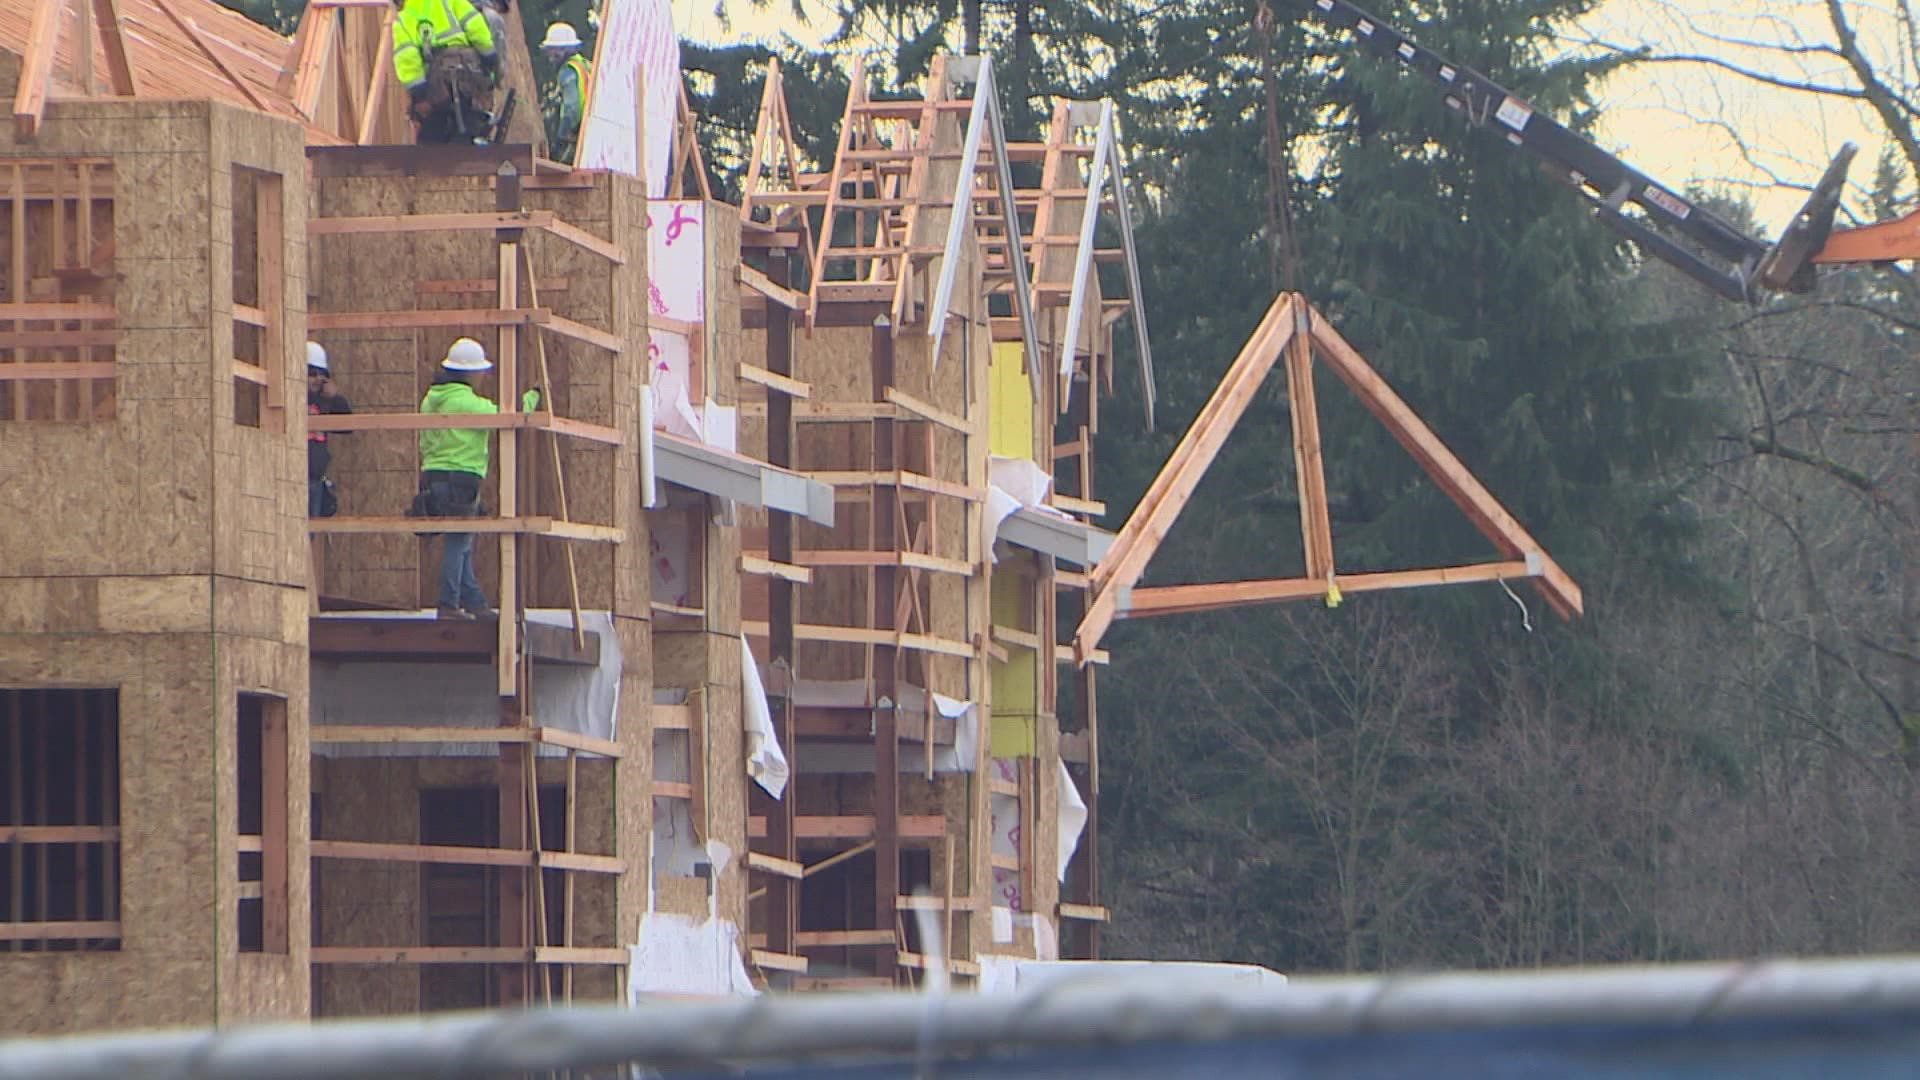 Inslee said homebuilding in the state has not kept up with population growth, one of the reasons he said the state is seeing an increase in the homeless population.